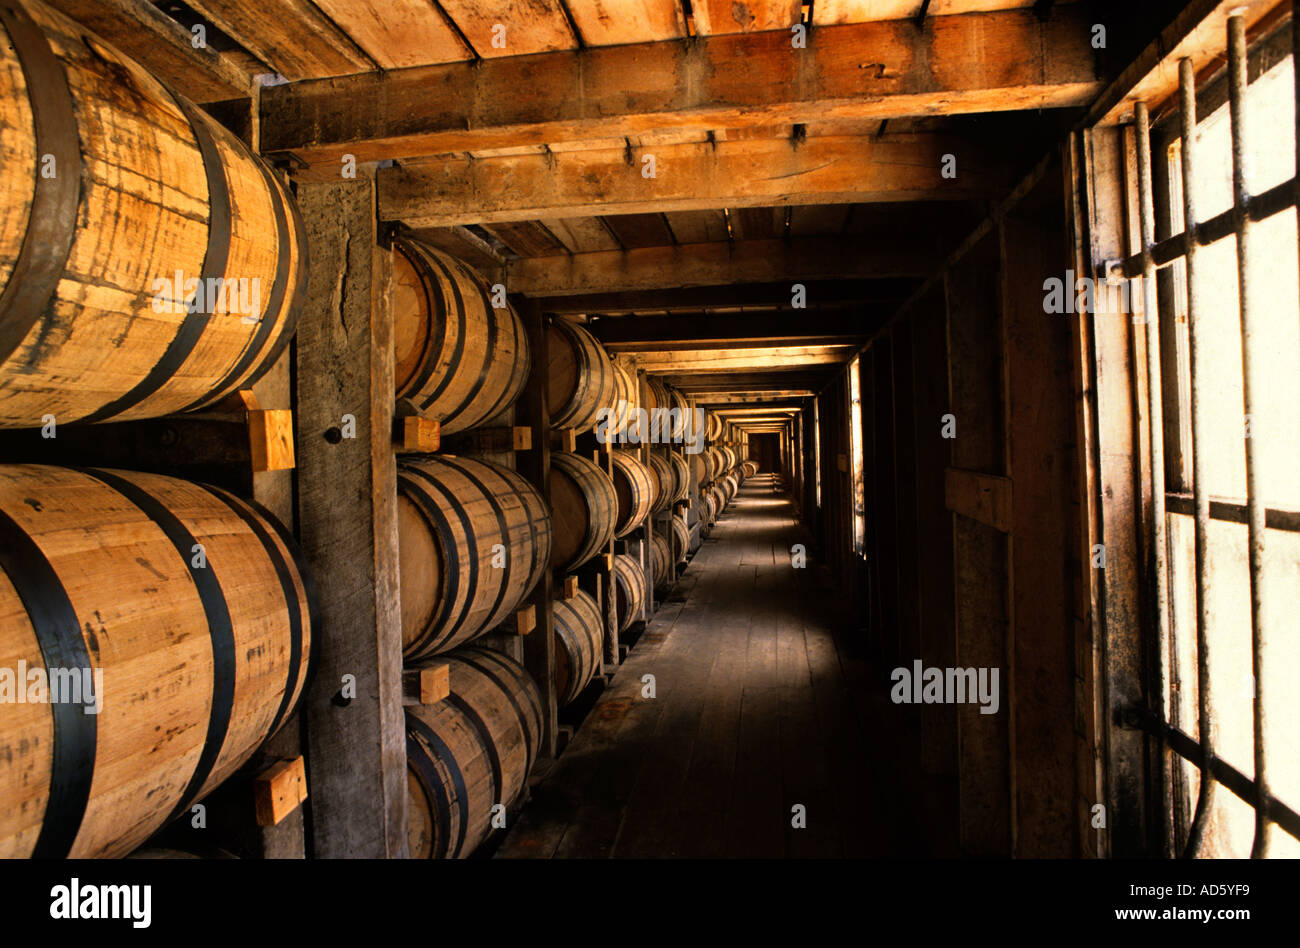 Jack Daniel's Tennessee United States of America USA Bourbon Whisky Distillery Stock Photo